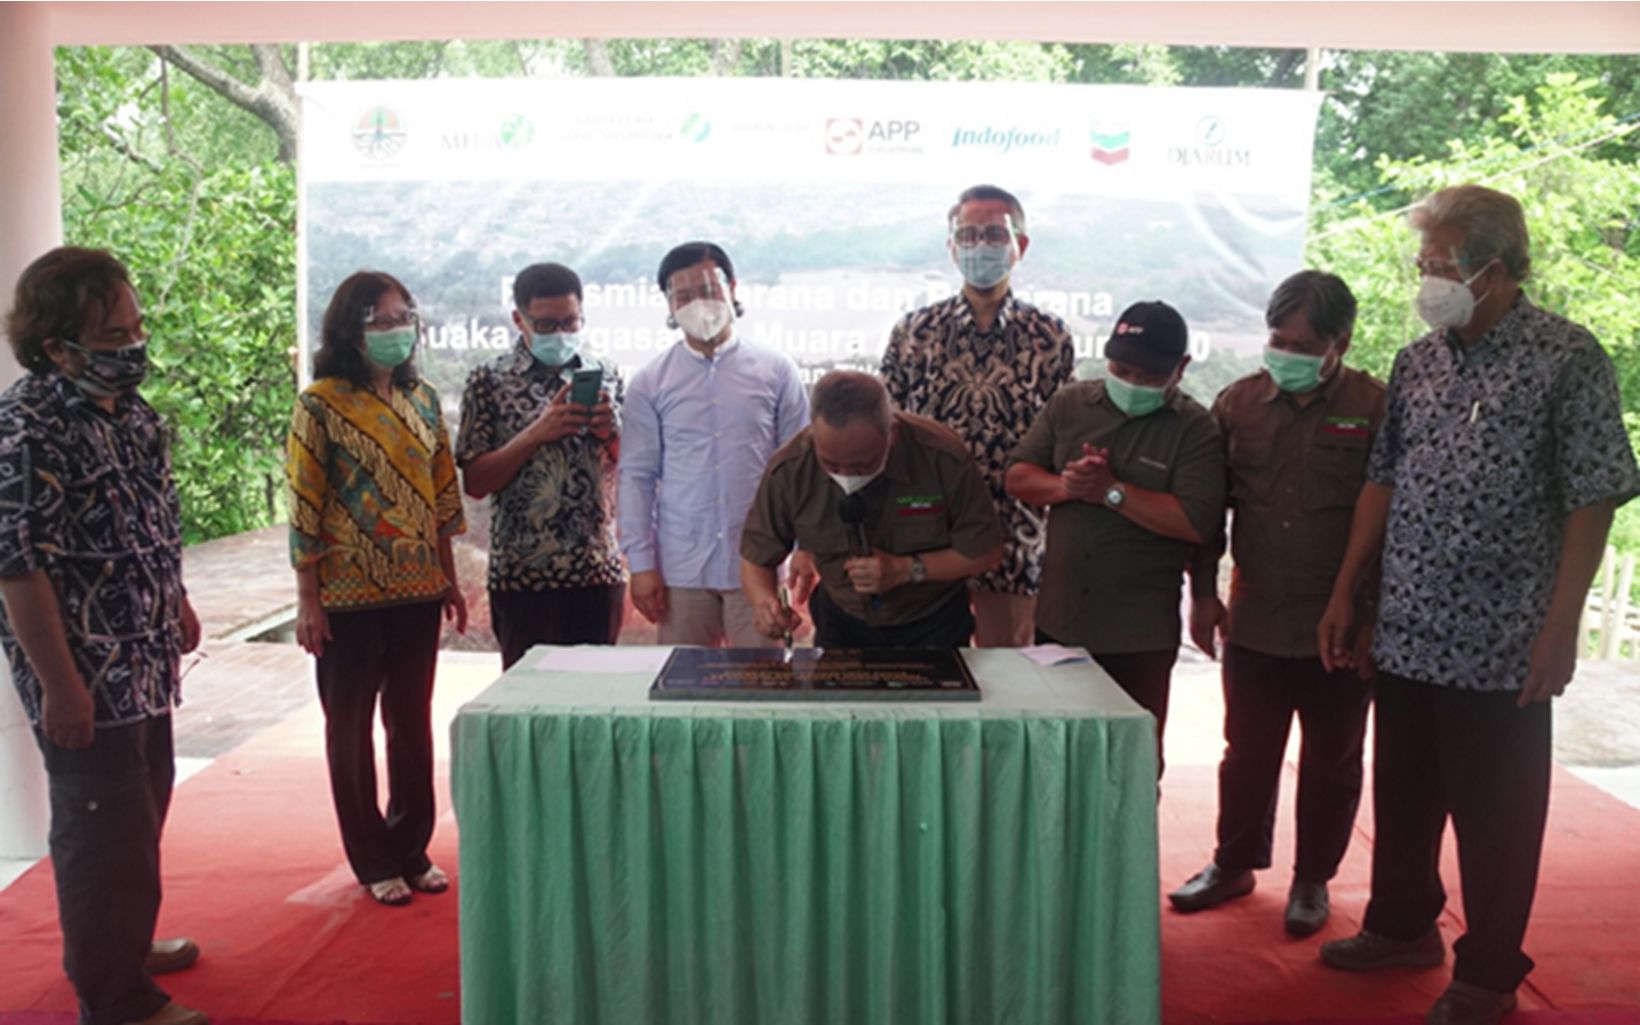 Inauguration Together with the Director General of KSDAE KLHK Mr. Wiratno signed the inauguration of Facilities and Infrastructures the Muara Angke Wildlife Reserve Jakarta. © YKAN